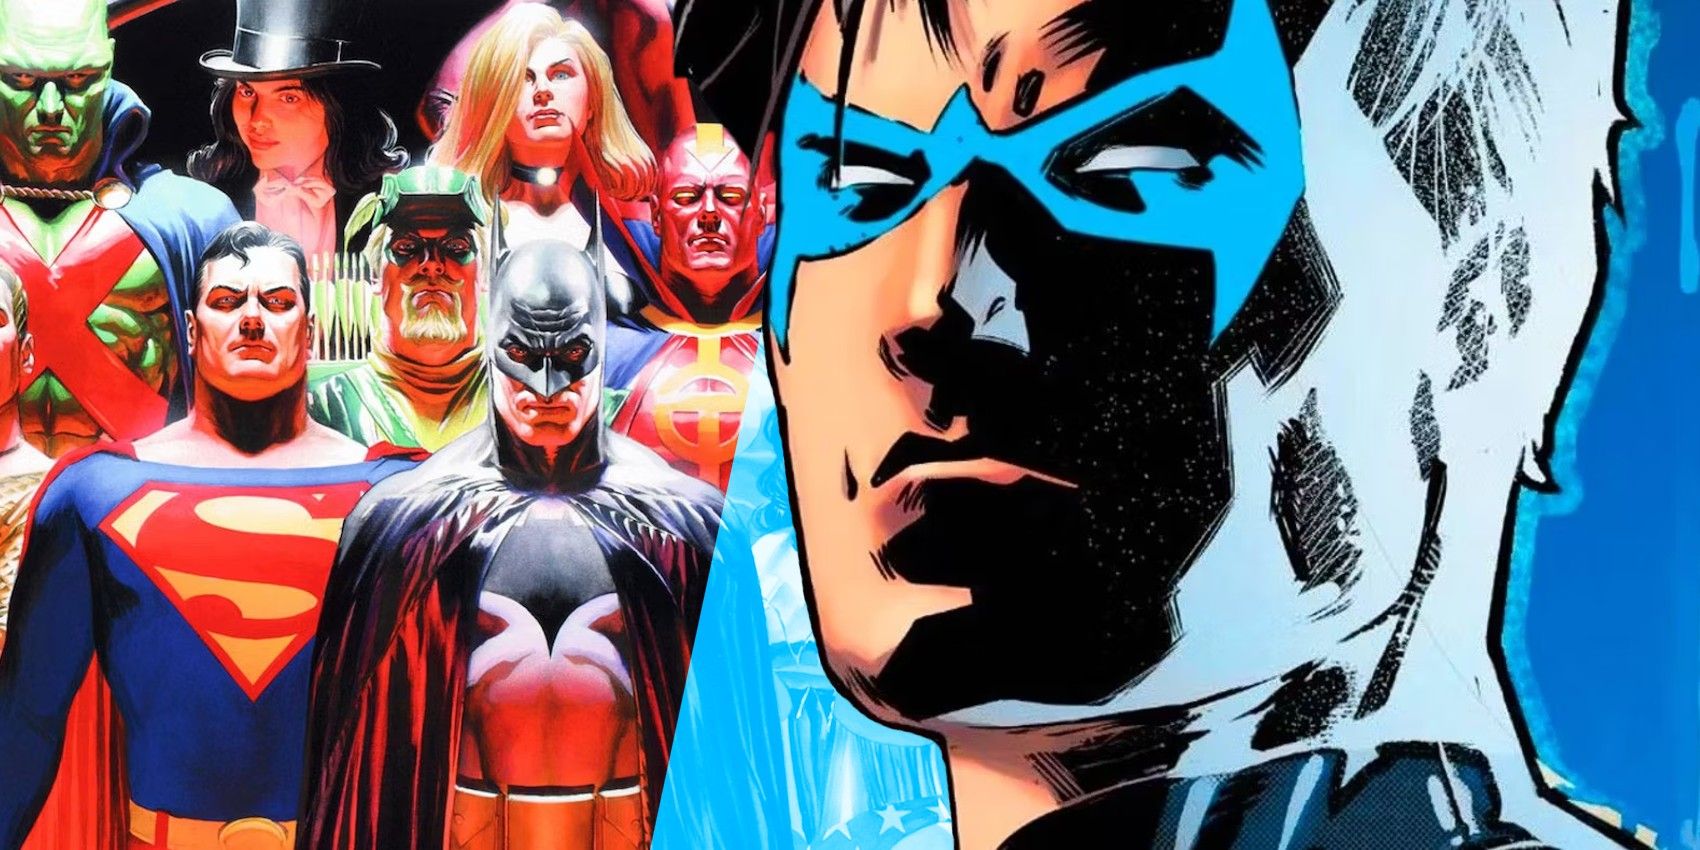 Nightwing Knows Just How to Take Down the Justice League